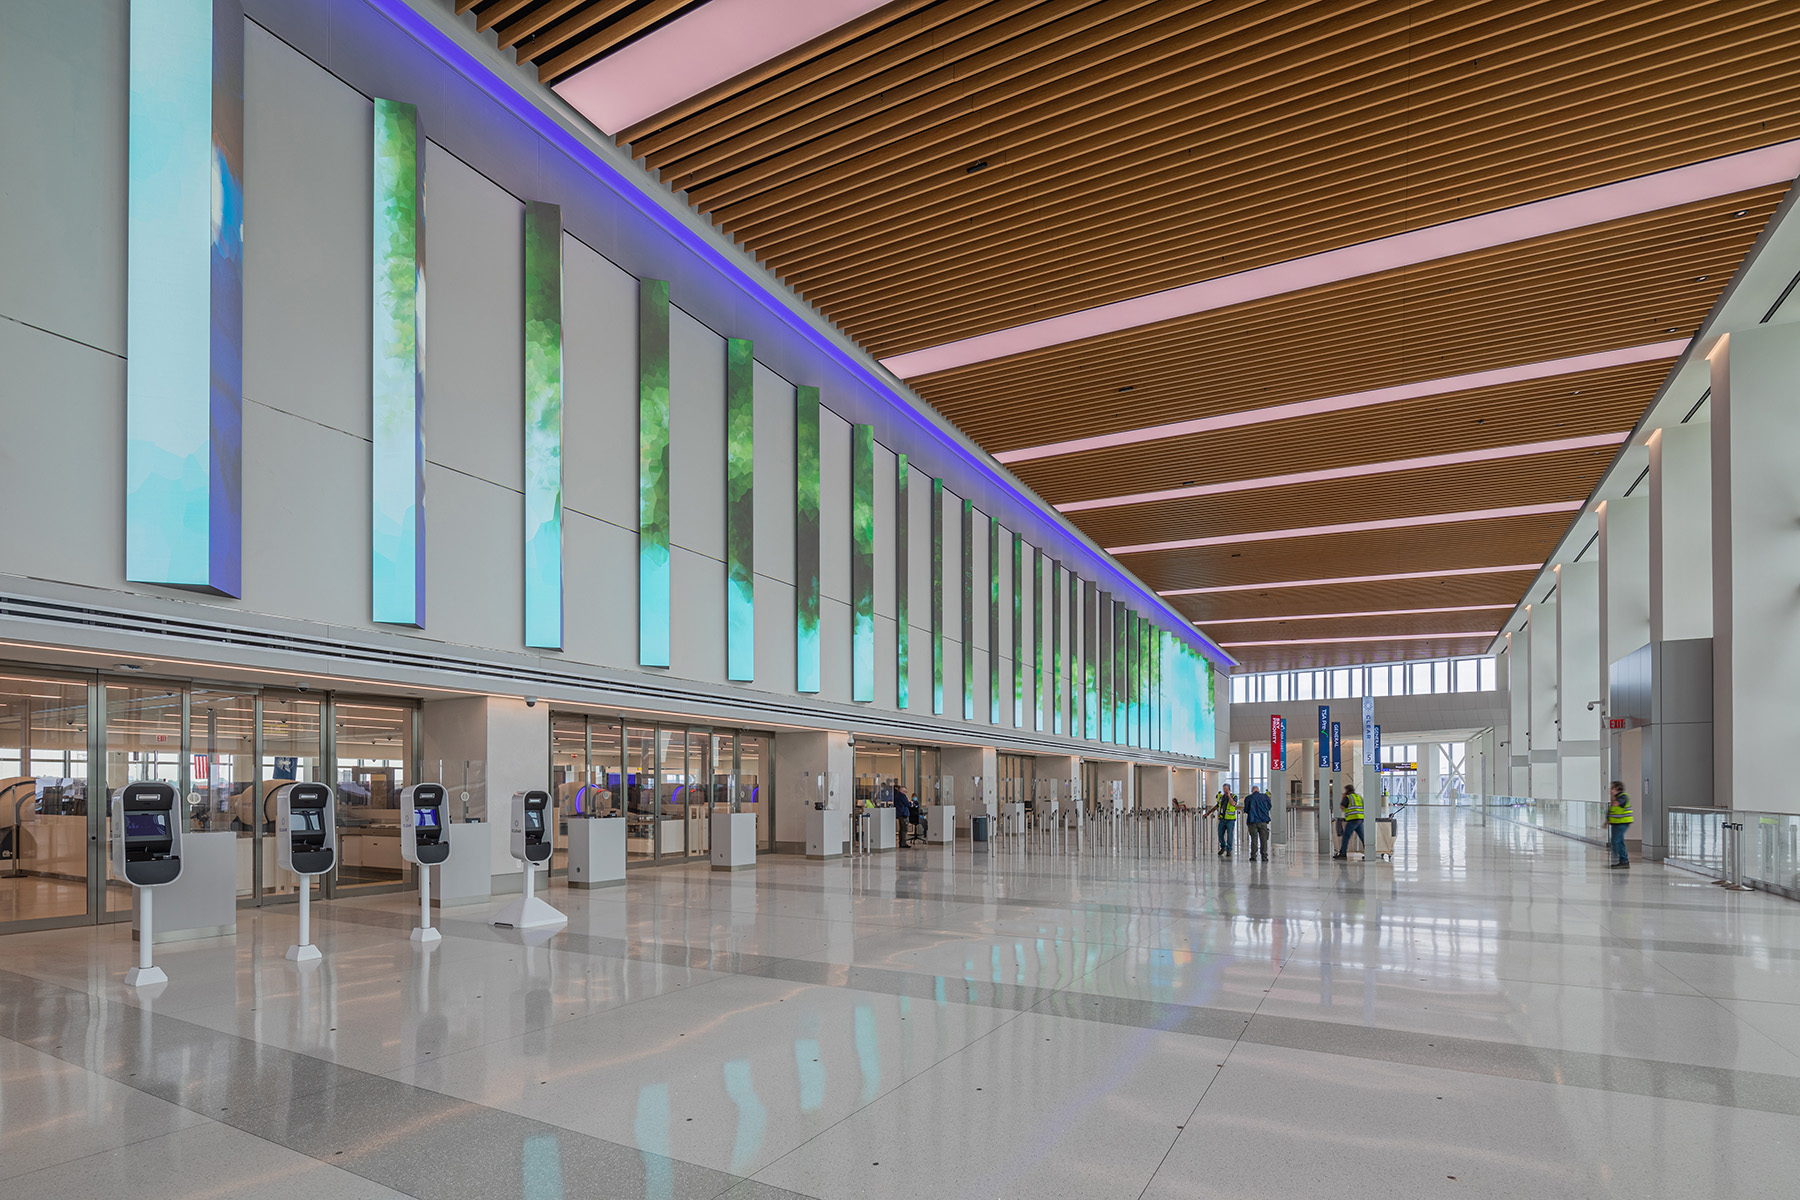 Photo shows the interior of a multistory airline terminal with its kiosks check-in stations. 